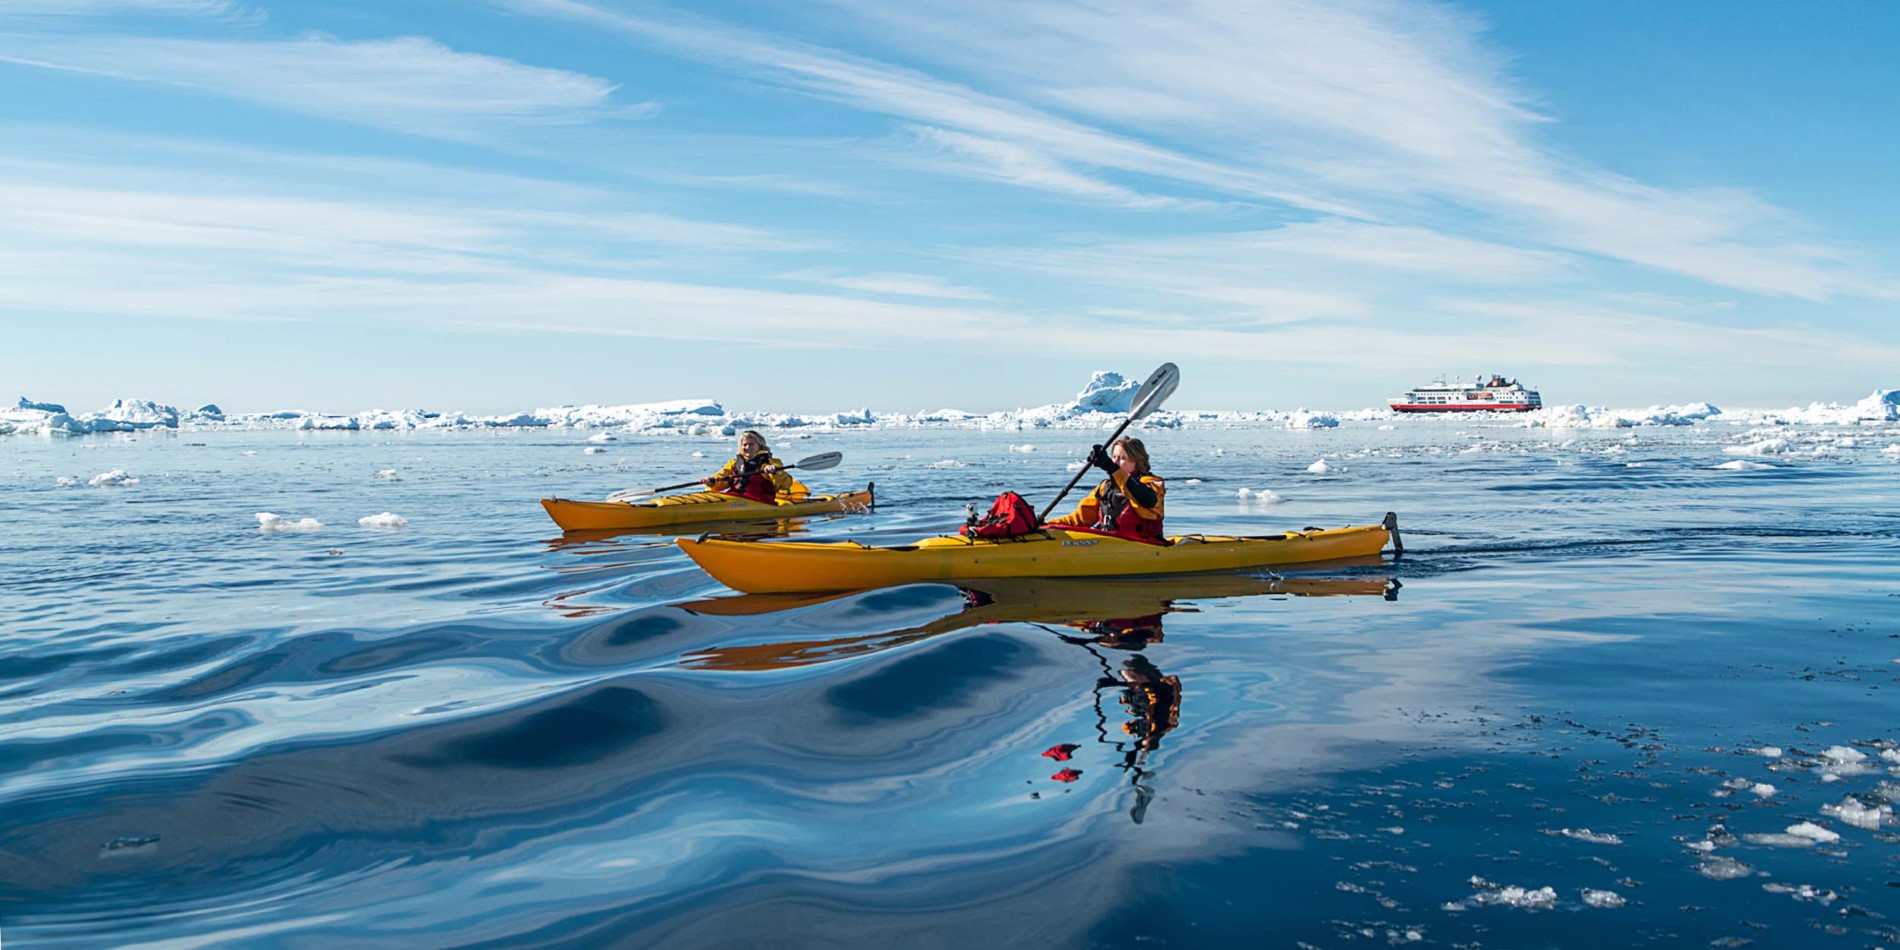 Kayaking is an exciting way to explore the waters 